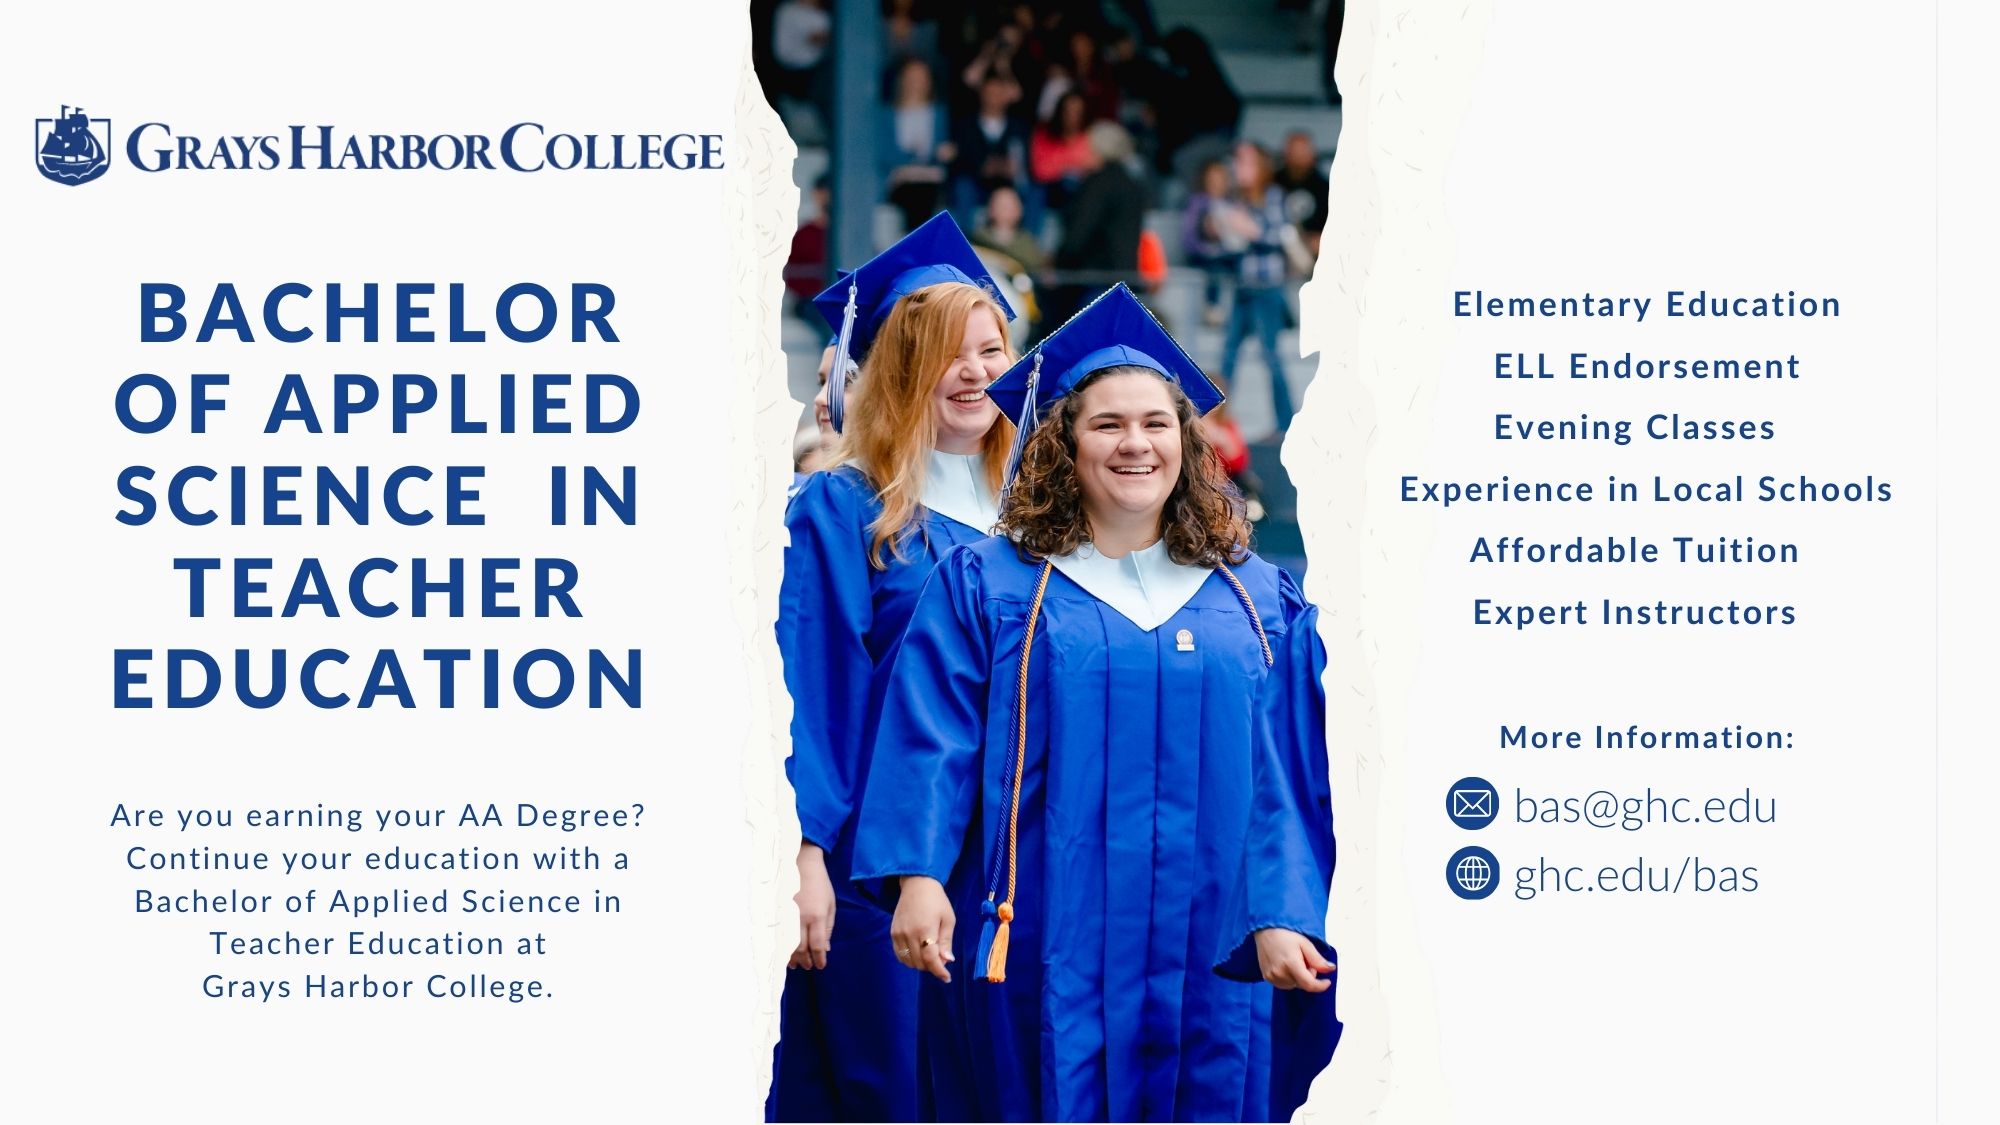 Bachelor of Applied Science in Teacher Education - Are you earning your AA Degree? Continue your education with BAS in Teacher Education at GHC. Elementary Education, ELL Endorsement, Evening Classes, Experience in Local Schools, Affordable Tuition, Expert Instructors.